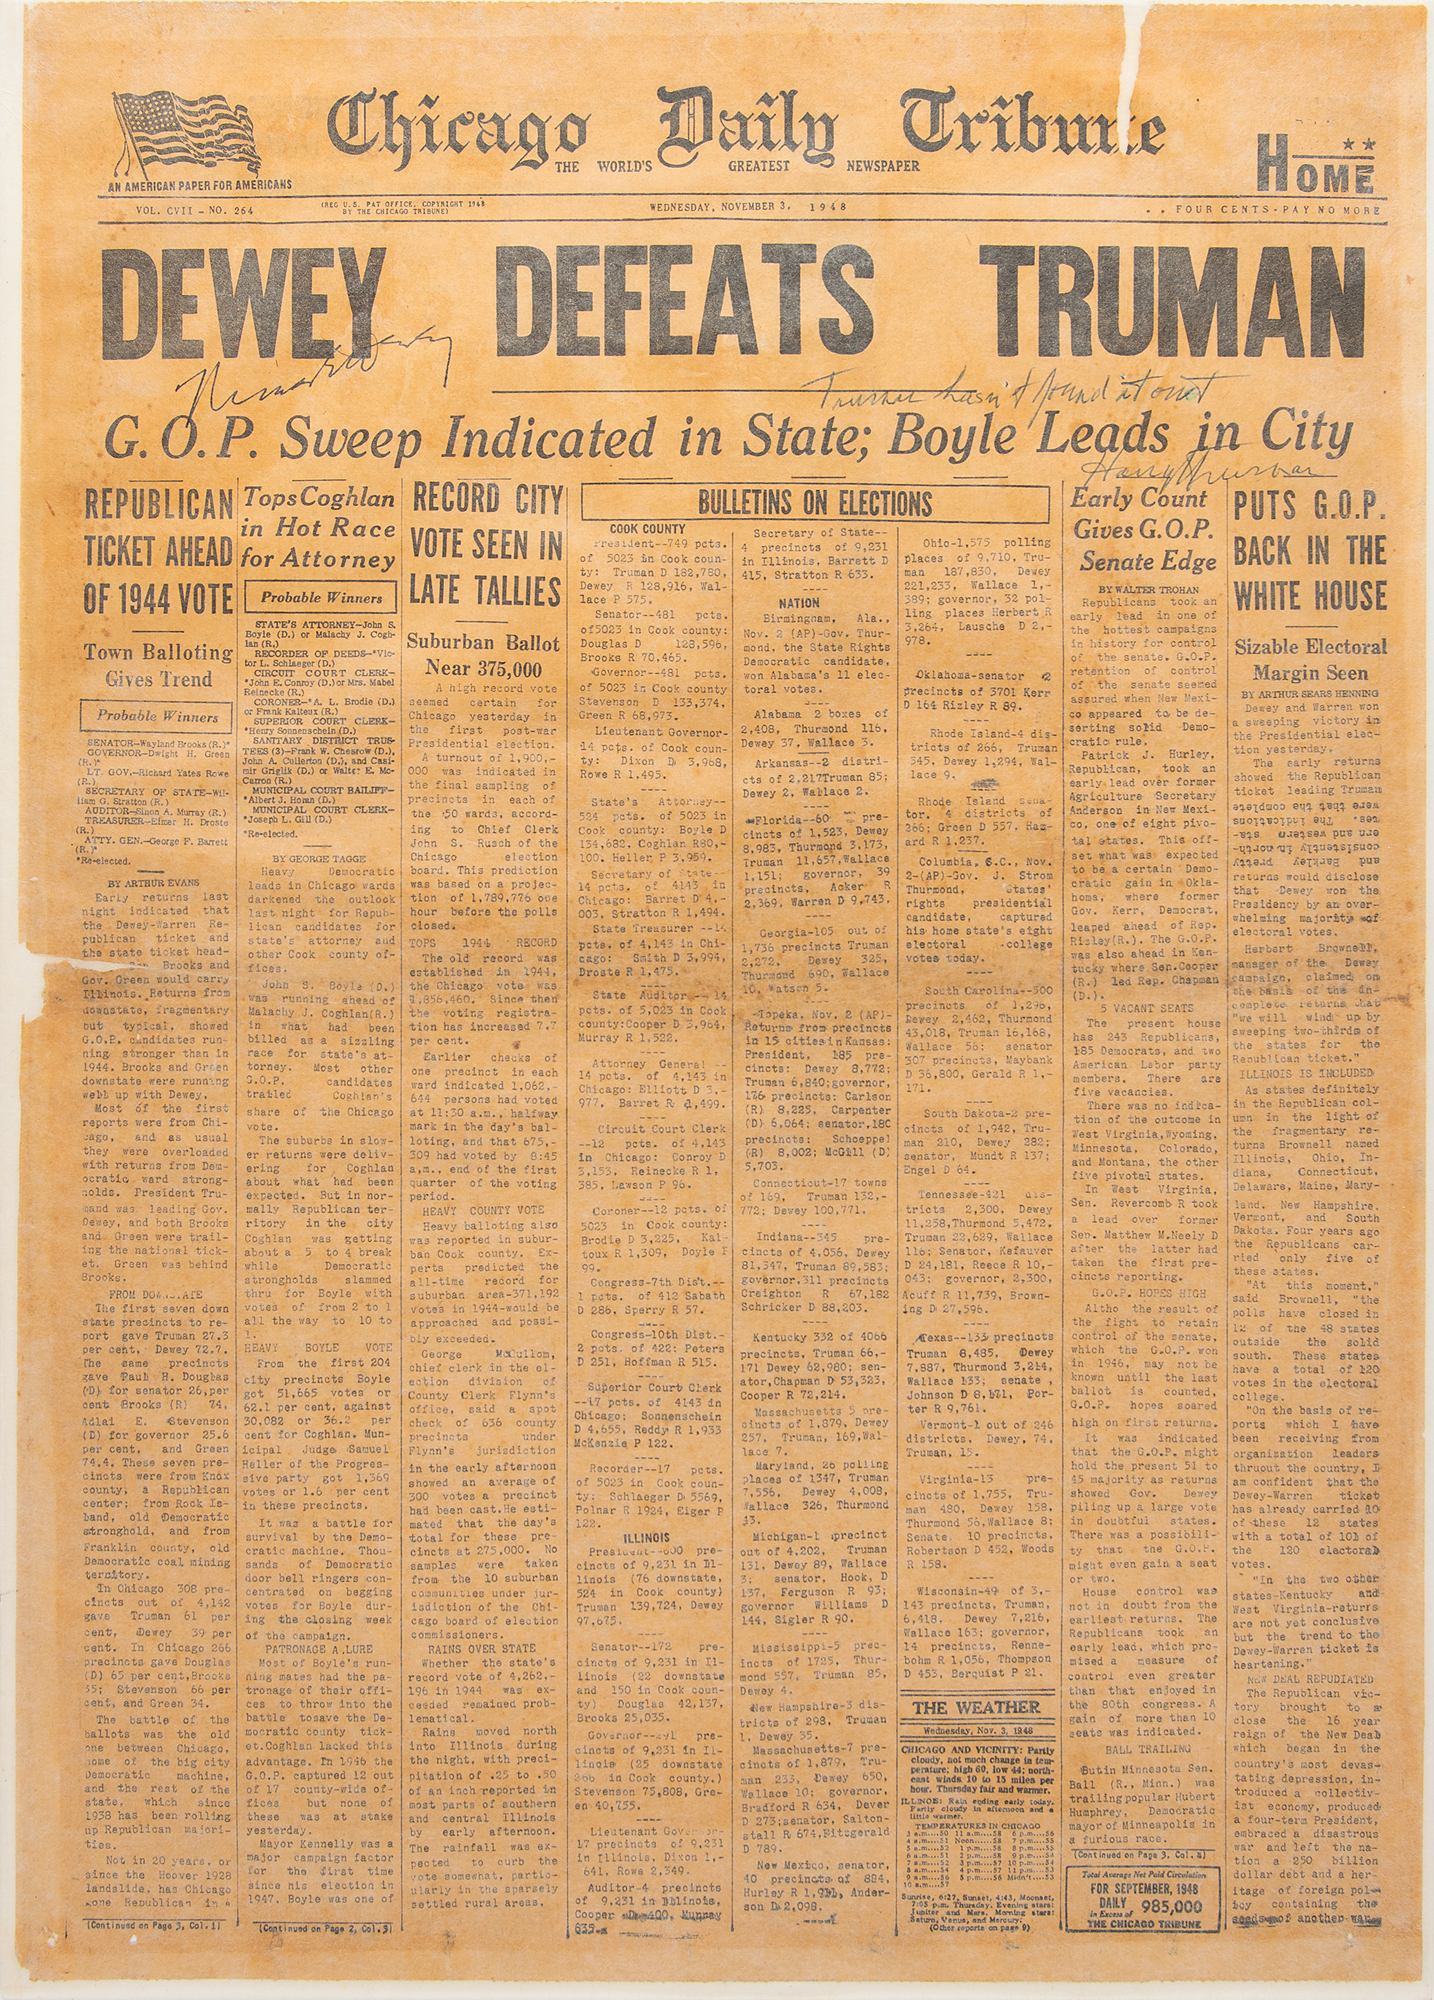 Lot #3011 Harry S. Truman and Thomas Dewey Signed Front Page of the Chicago Daily Tribune Newspaper